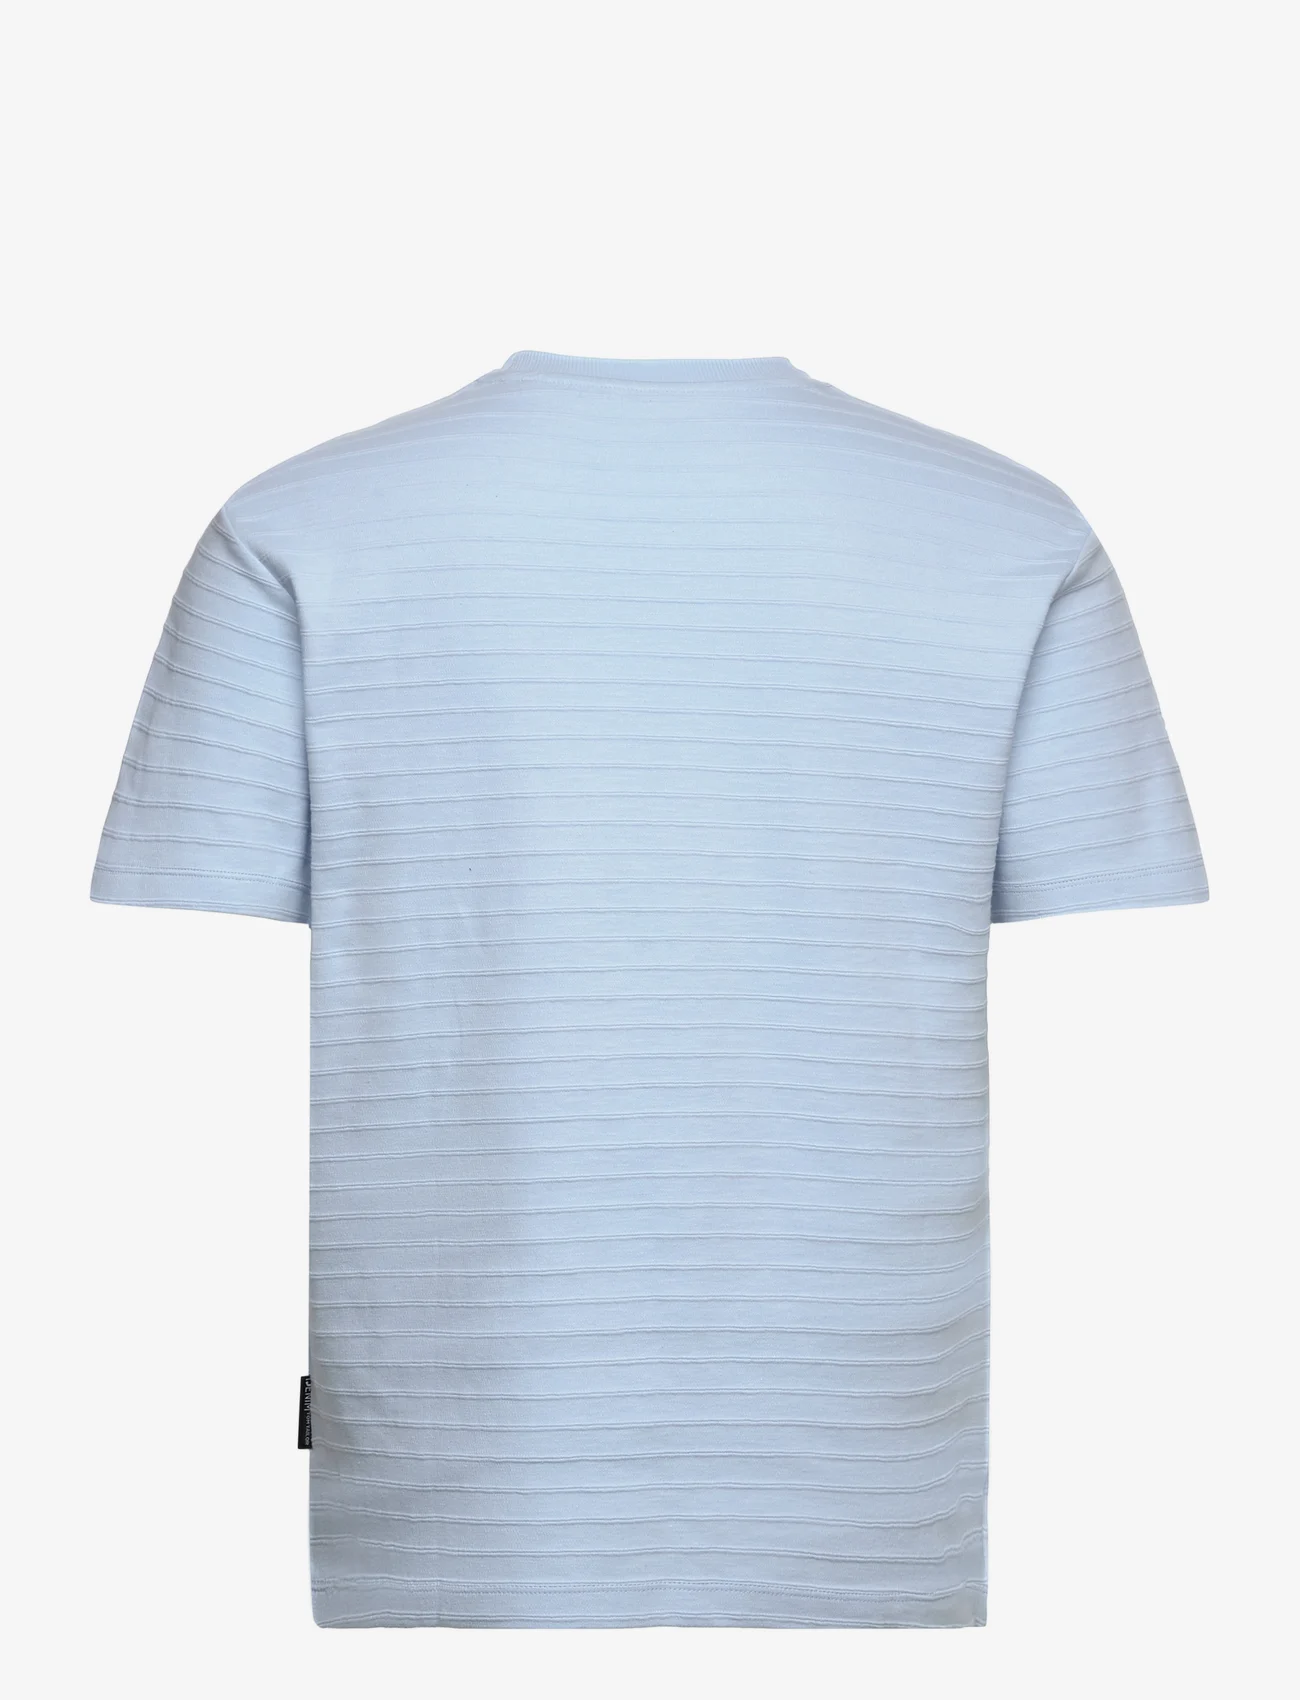 Tom Tailor - relaxed structured t-shirt - die niedrigsten preise - middle sky blue - 1